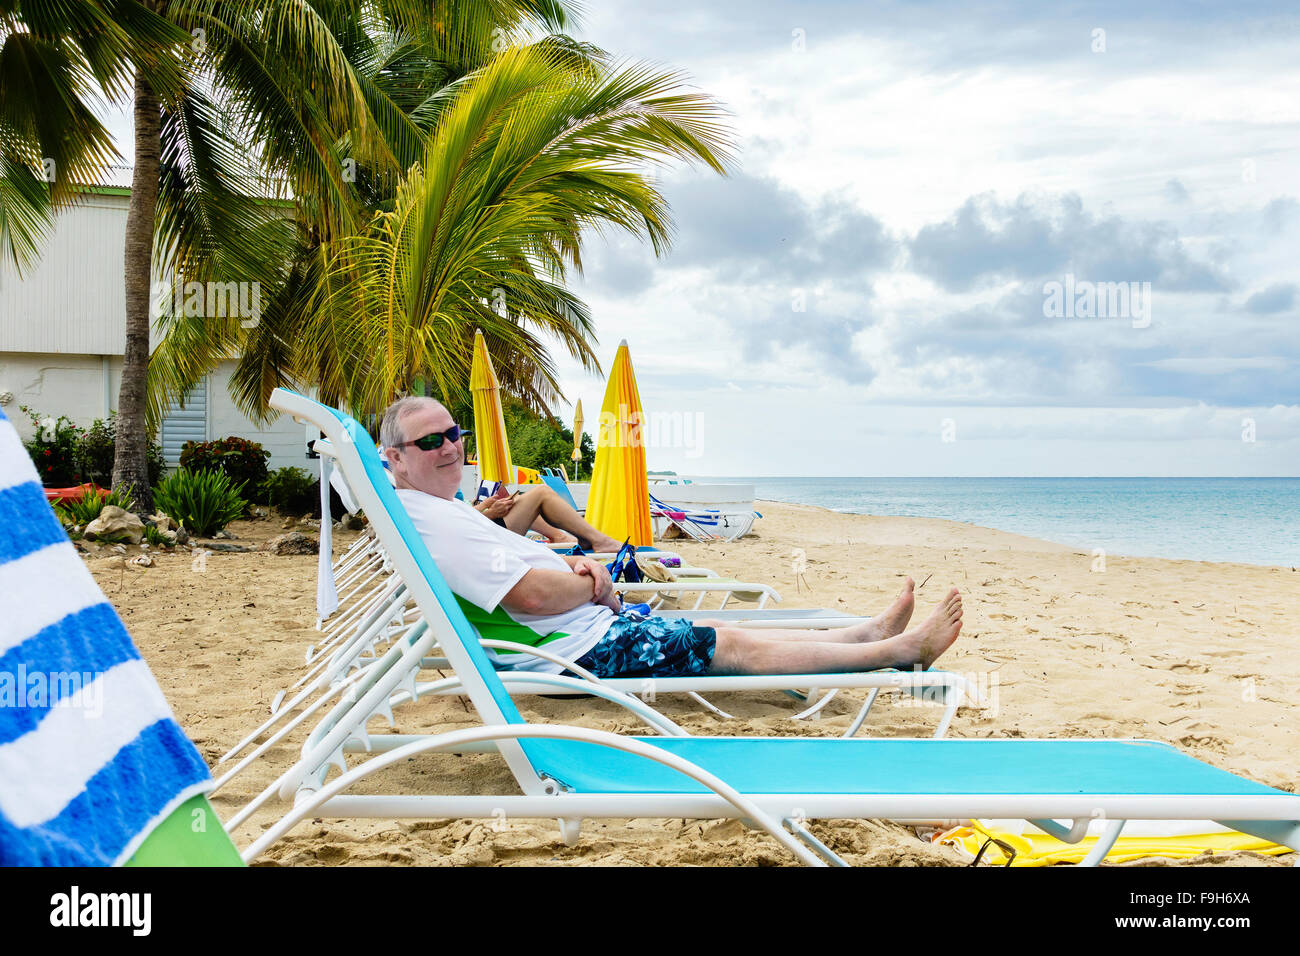 A 50 year old Caucasian man relaxes on a beach chair after a swim in the Caribbean at Cottages by the Sea resort in St. Croix, U.S. Virgin Islands. Stock Photo